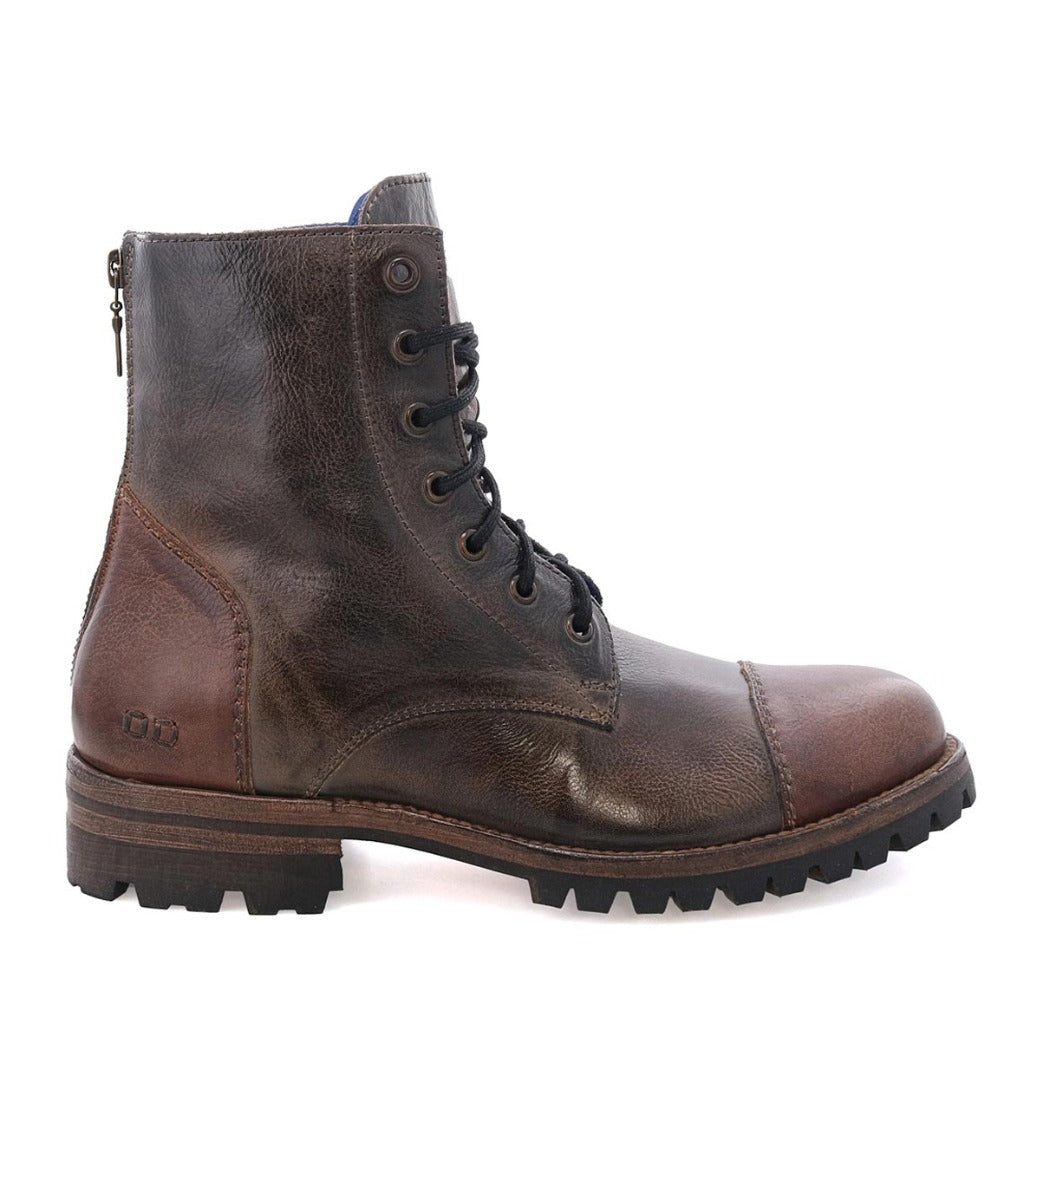 A men's brown leather Protege Trek boot with laces by Bed Stu.